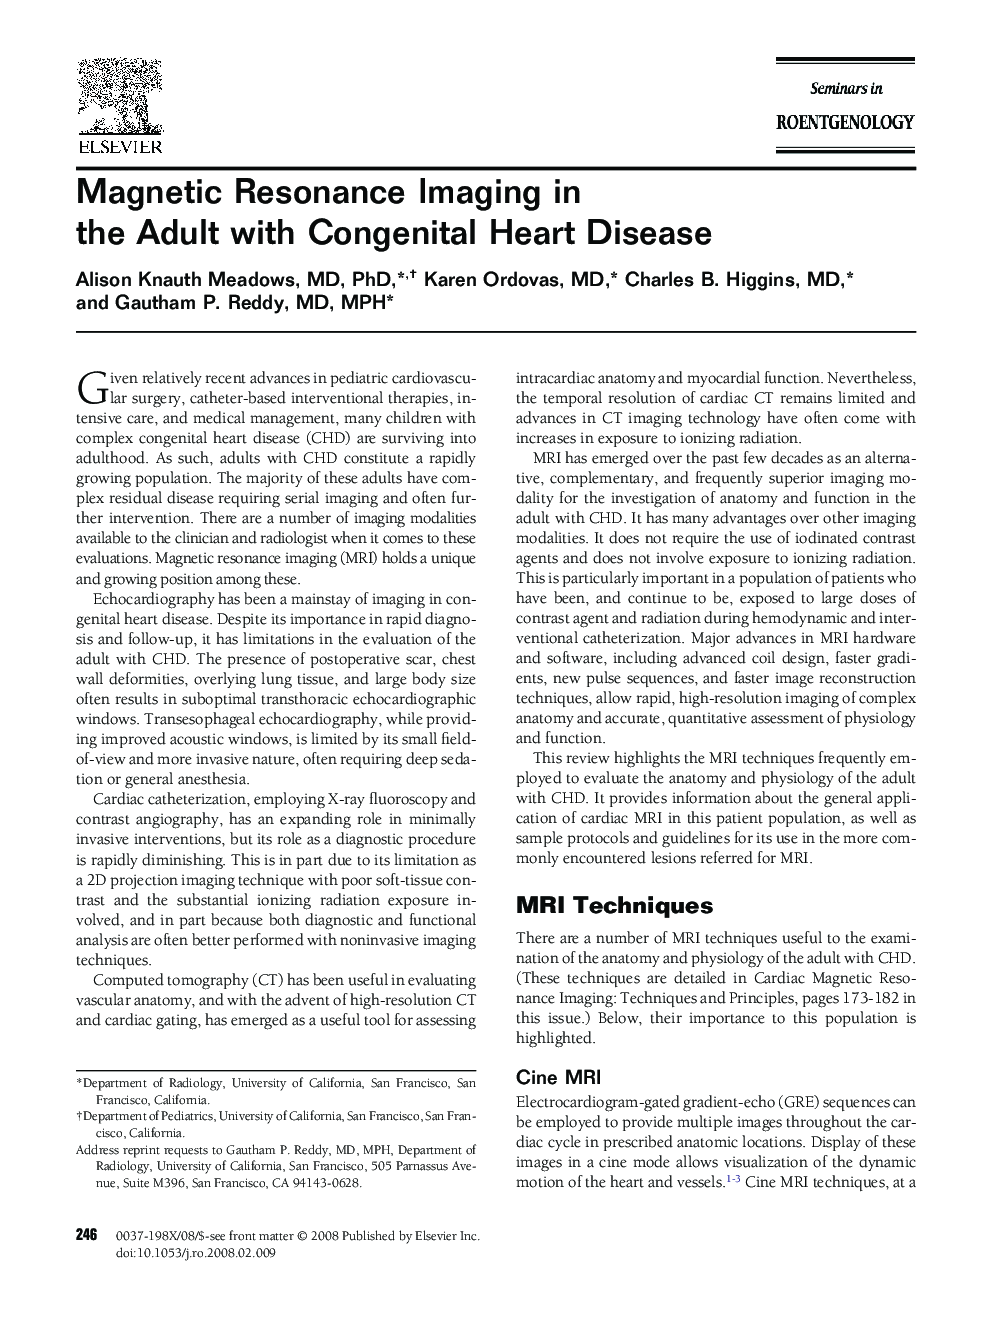 Magnetic Resonance Imaging in the Adult with Congenital Heart Disease